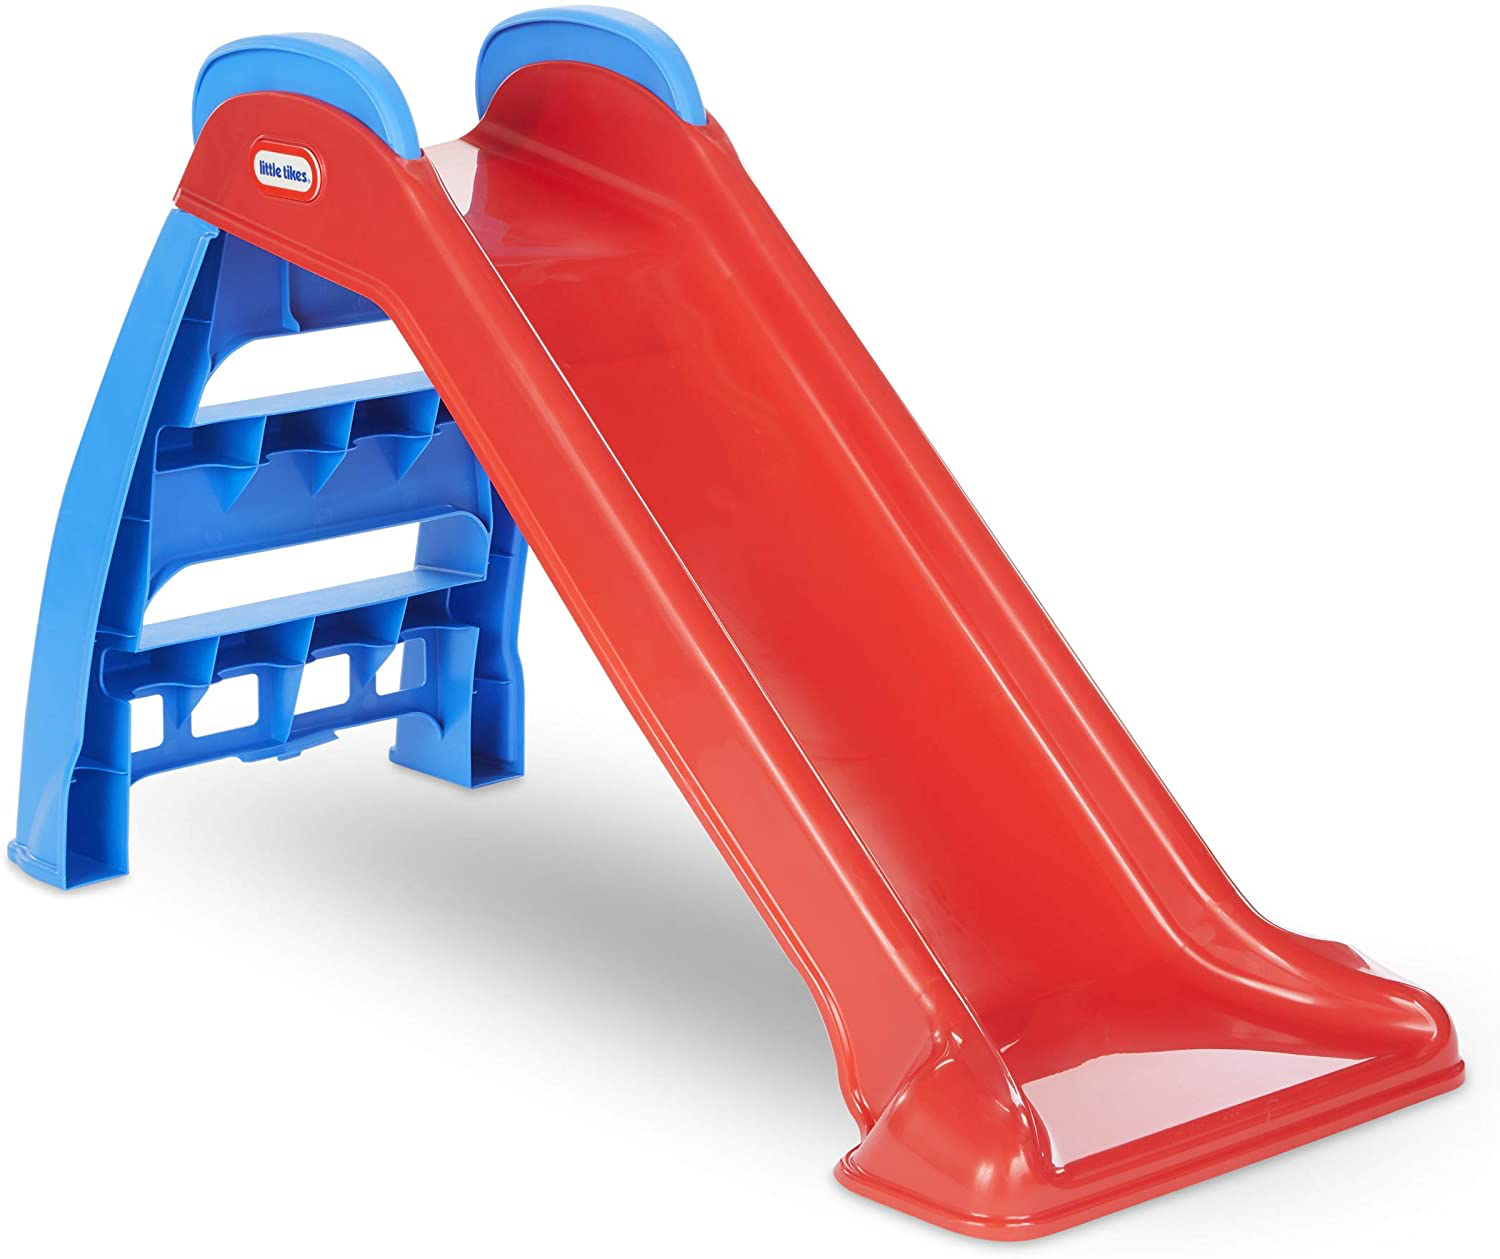 Little Tikes First Slide Toddler Slide, Easy Set Up Playset for Indoor Outdoor Backyard, Easy to Store, Safe Toy for Toddler, Slip And Slide For Kids (Red/Blue)